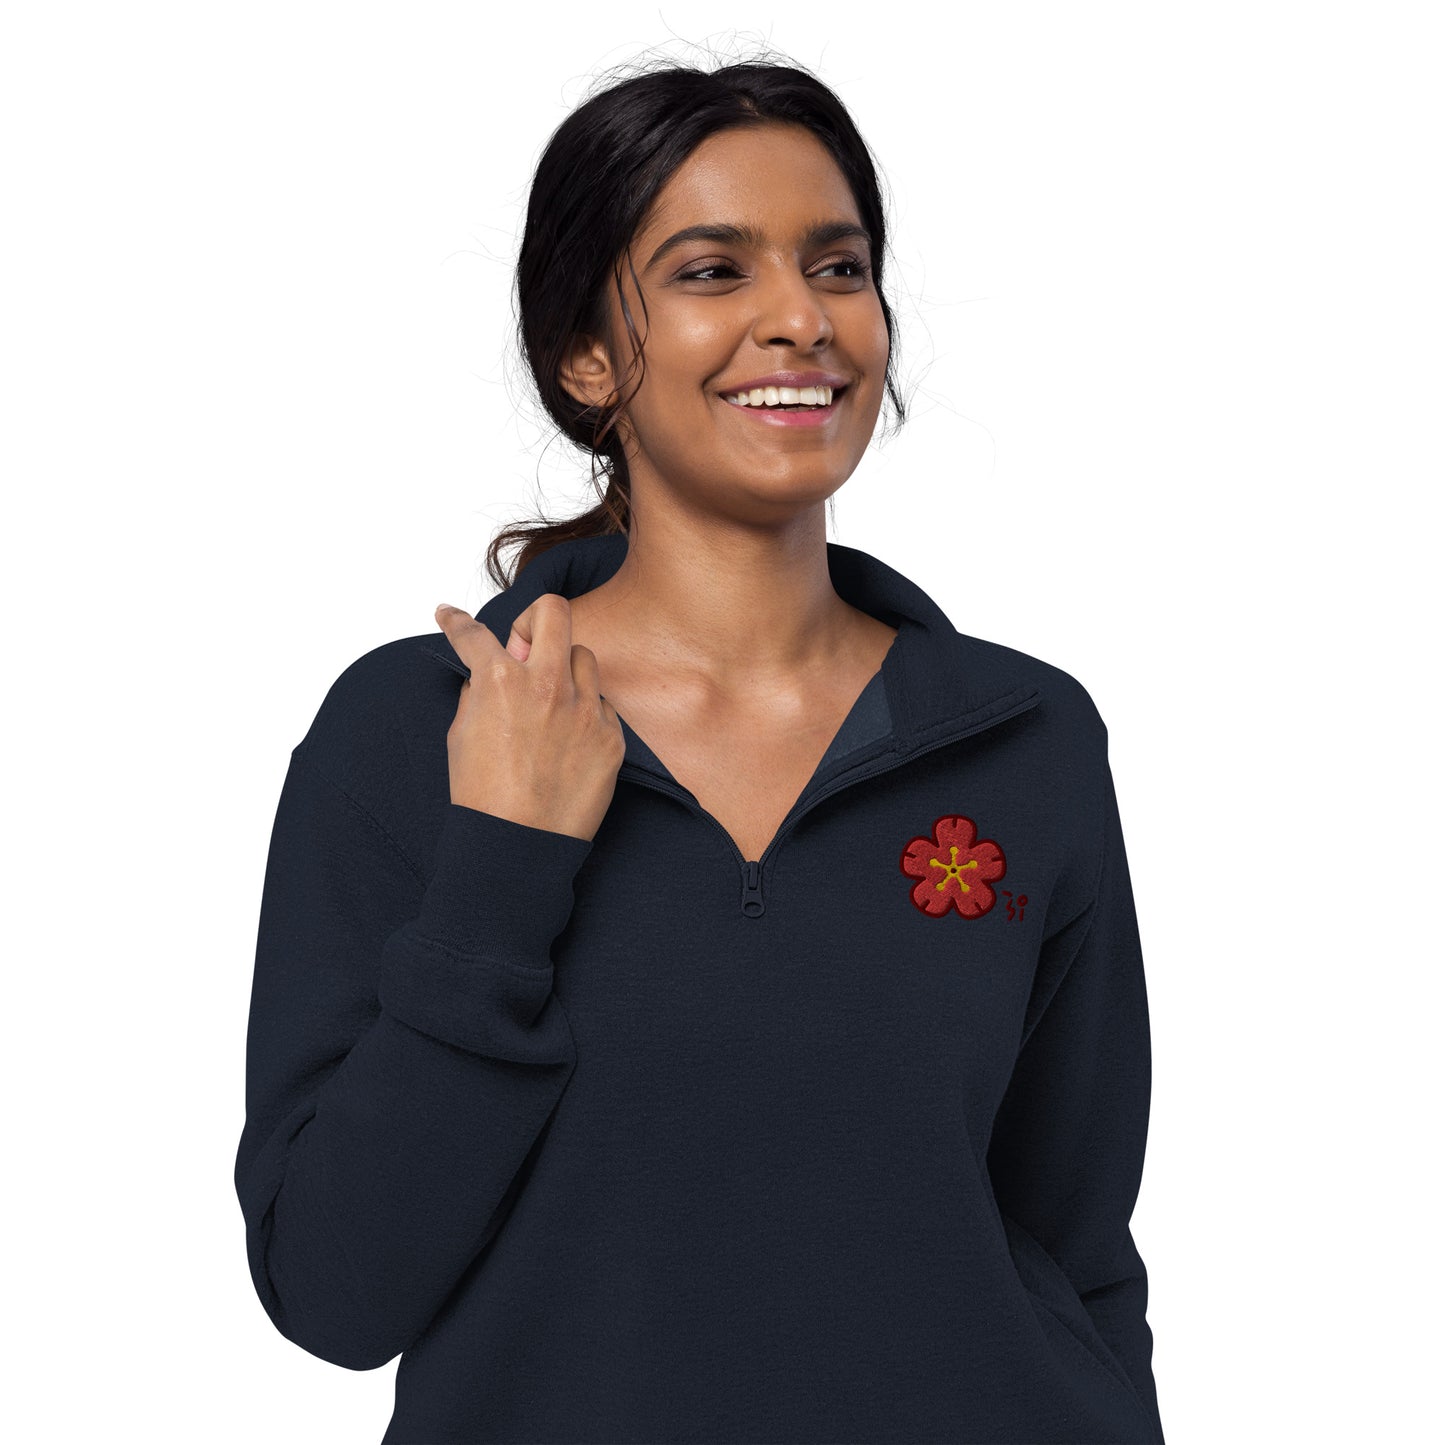 Chinese quince Unisex fleece pullover